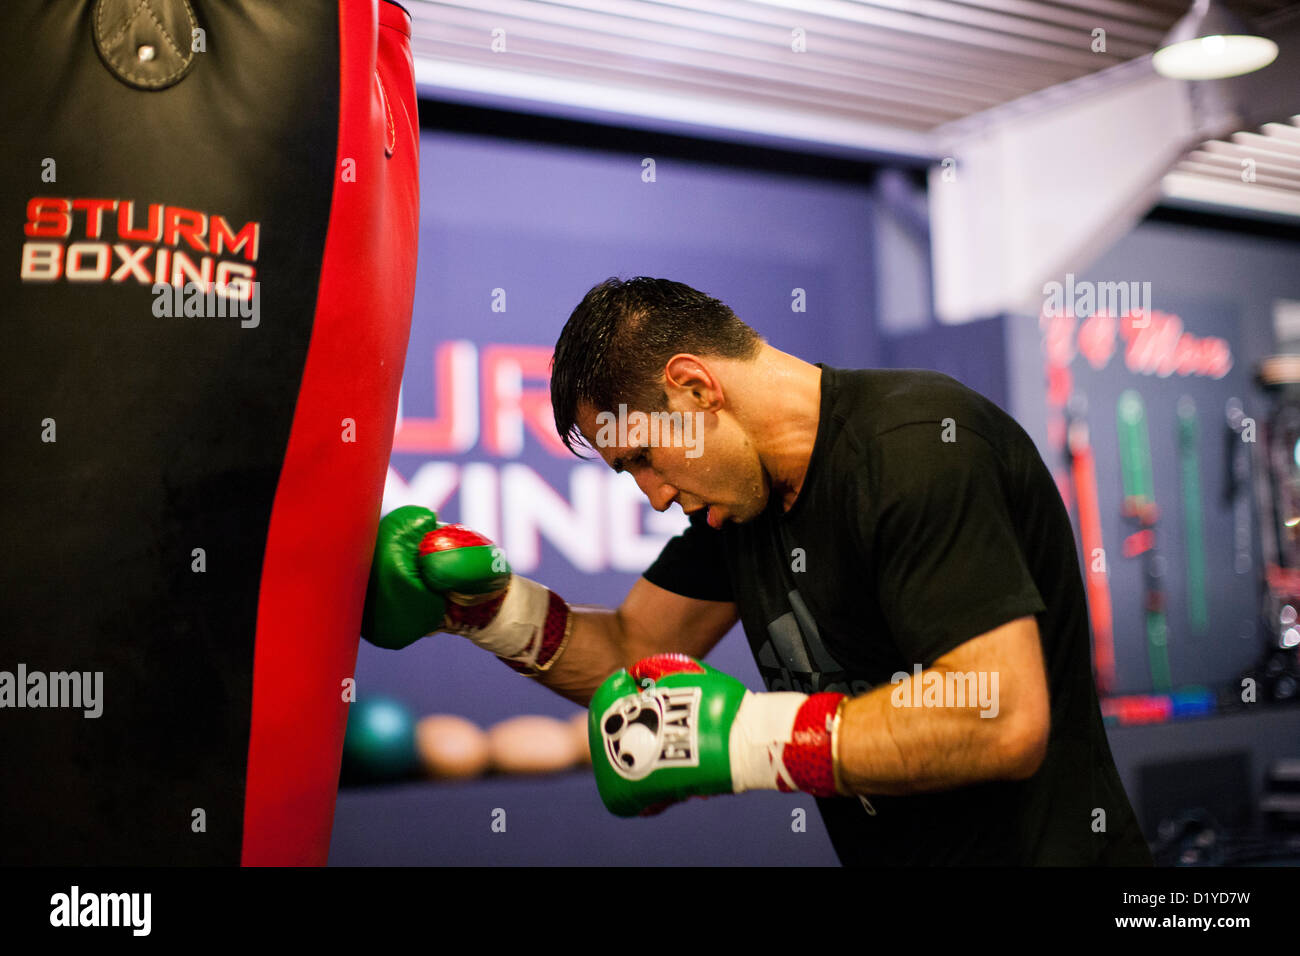 German boxing professional Felix Sturm prepares for the fight against Australian boxer Soliman in his gym in Cologne, Germany, 08 January 2013. The world championship fight will take place at ISS Dome in Duesseldorf on 01 February. Photo: Rolf Vennenbernd Stock Photo